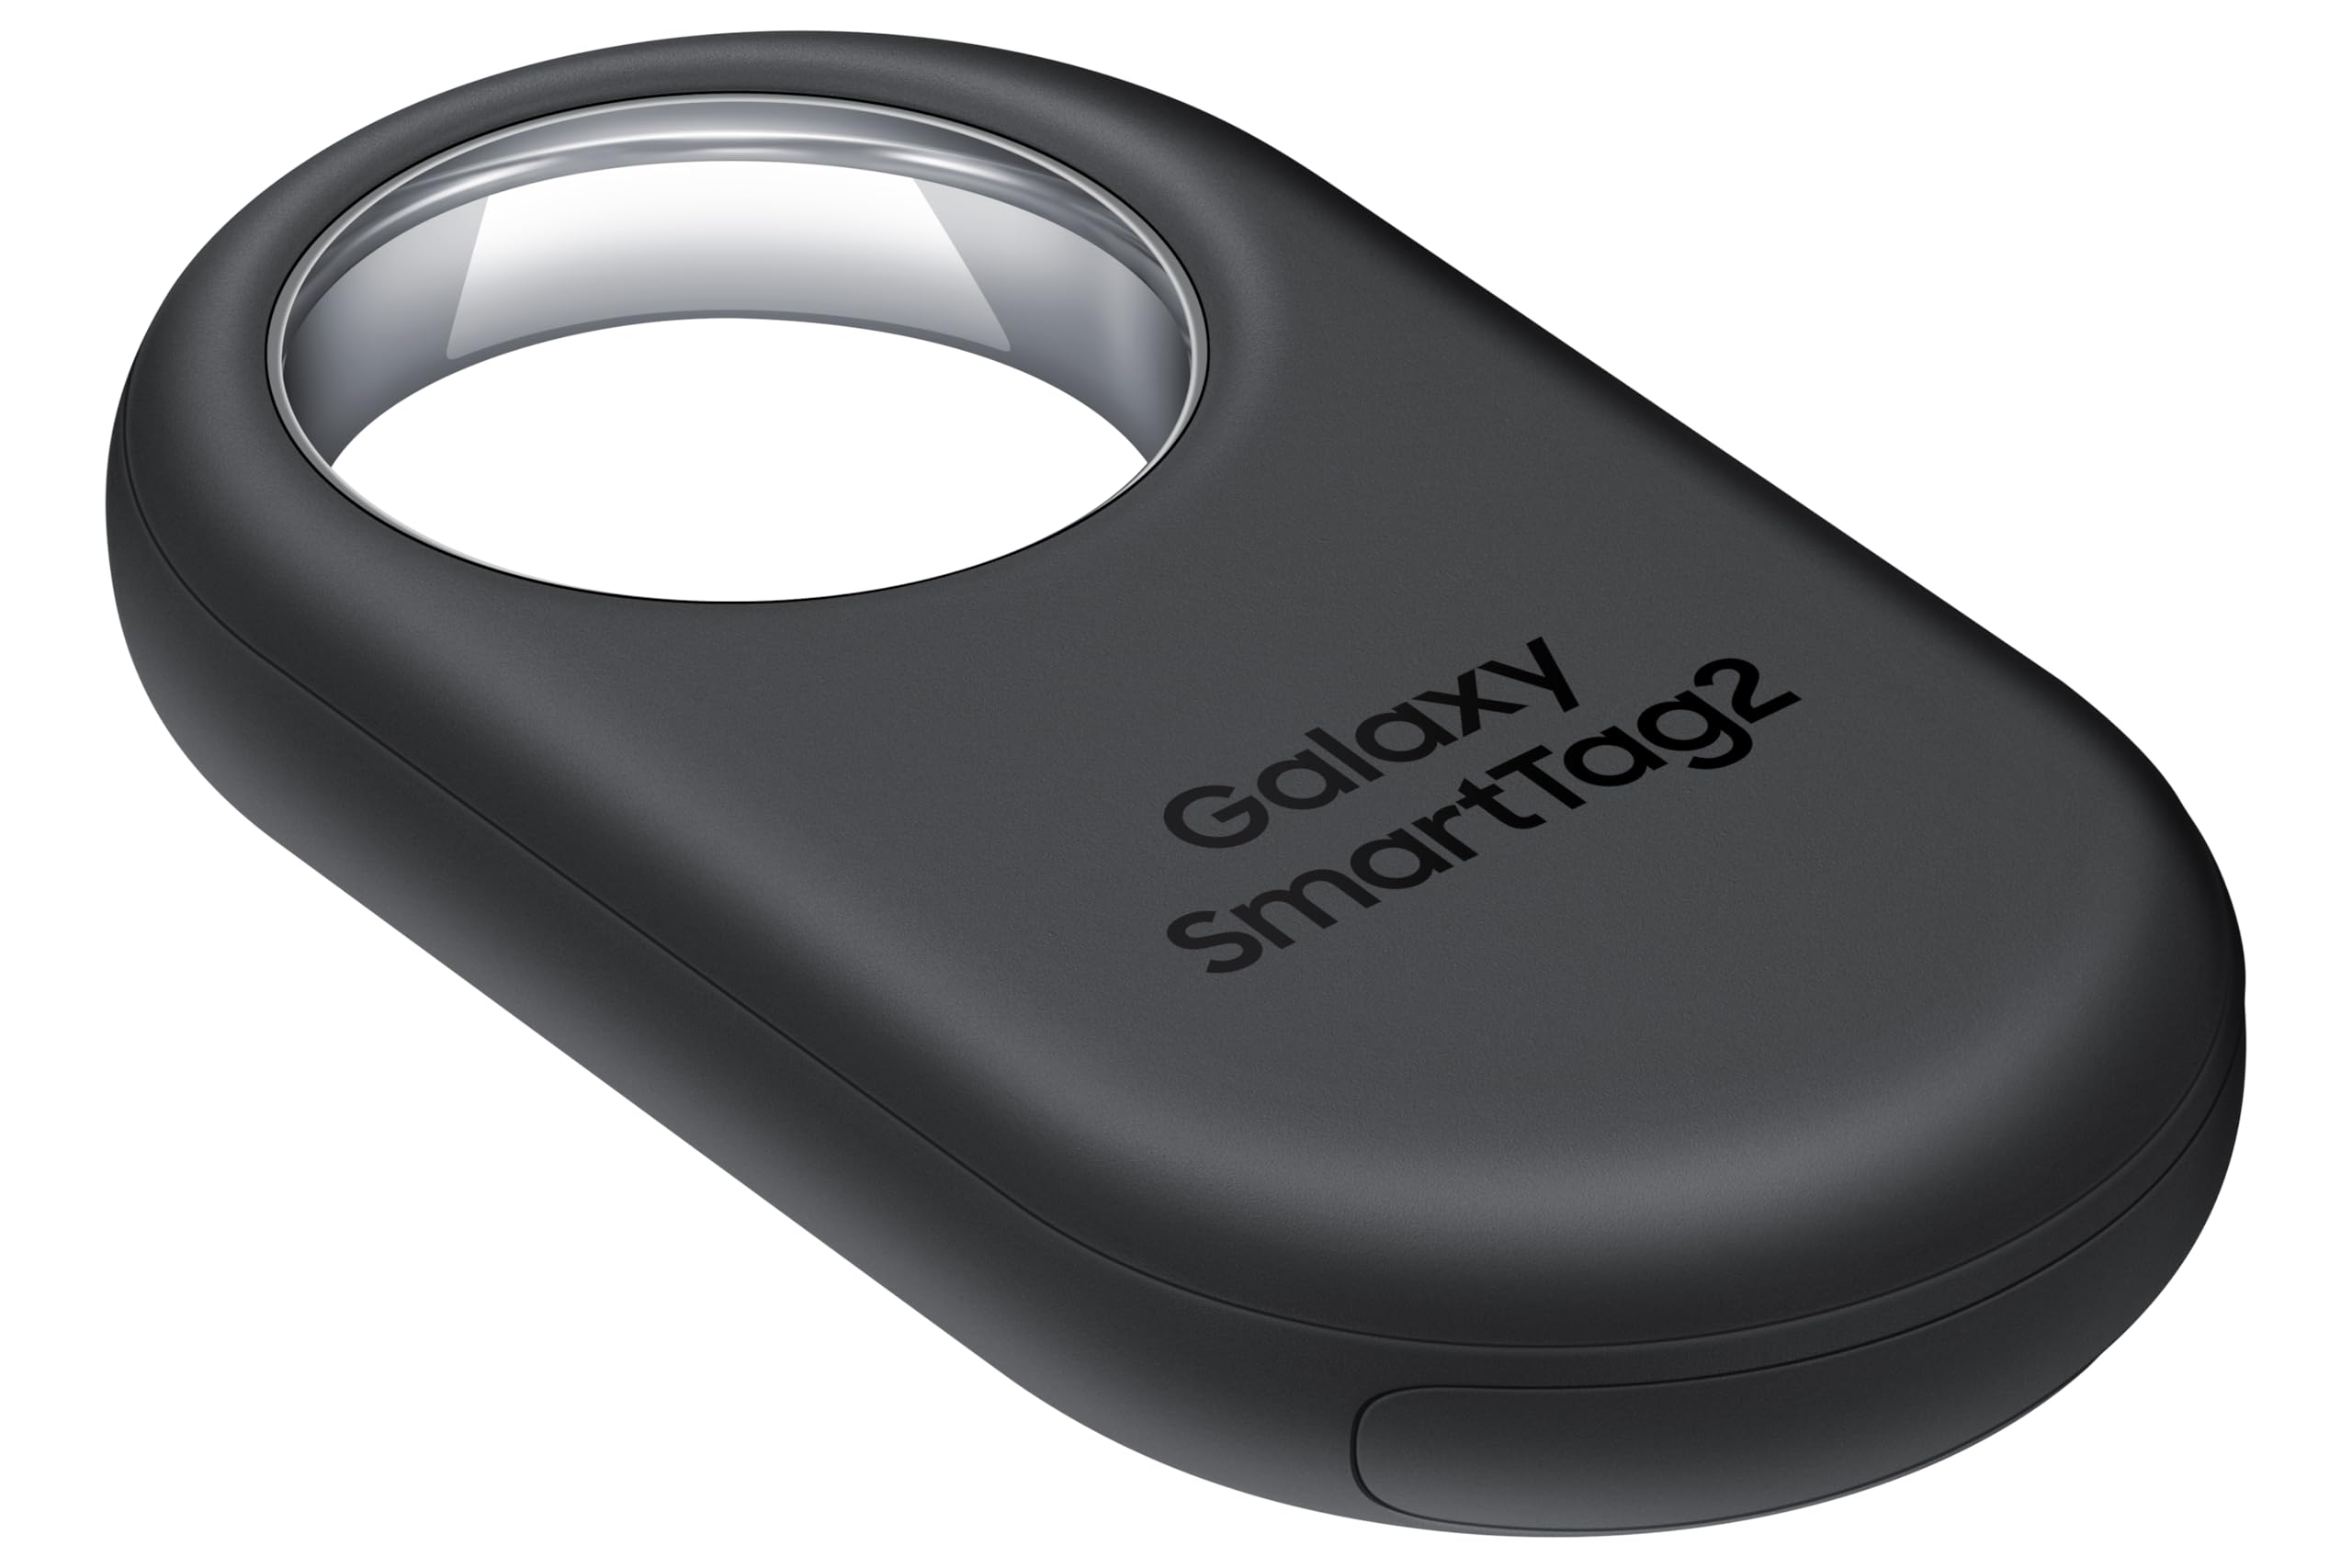 SAMSUNG Galaxy SmartTag2, Bluetooth Tracker, Smart Tag GPS Locator Tracking Device, Item Finder for Keys, Wallet, Luggage, Pets, Use w/Phones and Tablets Android 11 or Later, 2023, 1 Pack, Black